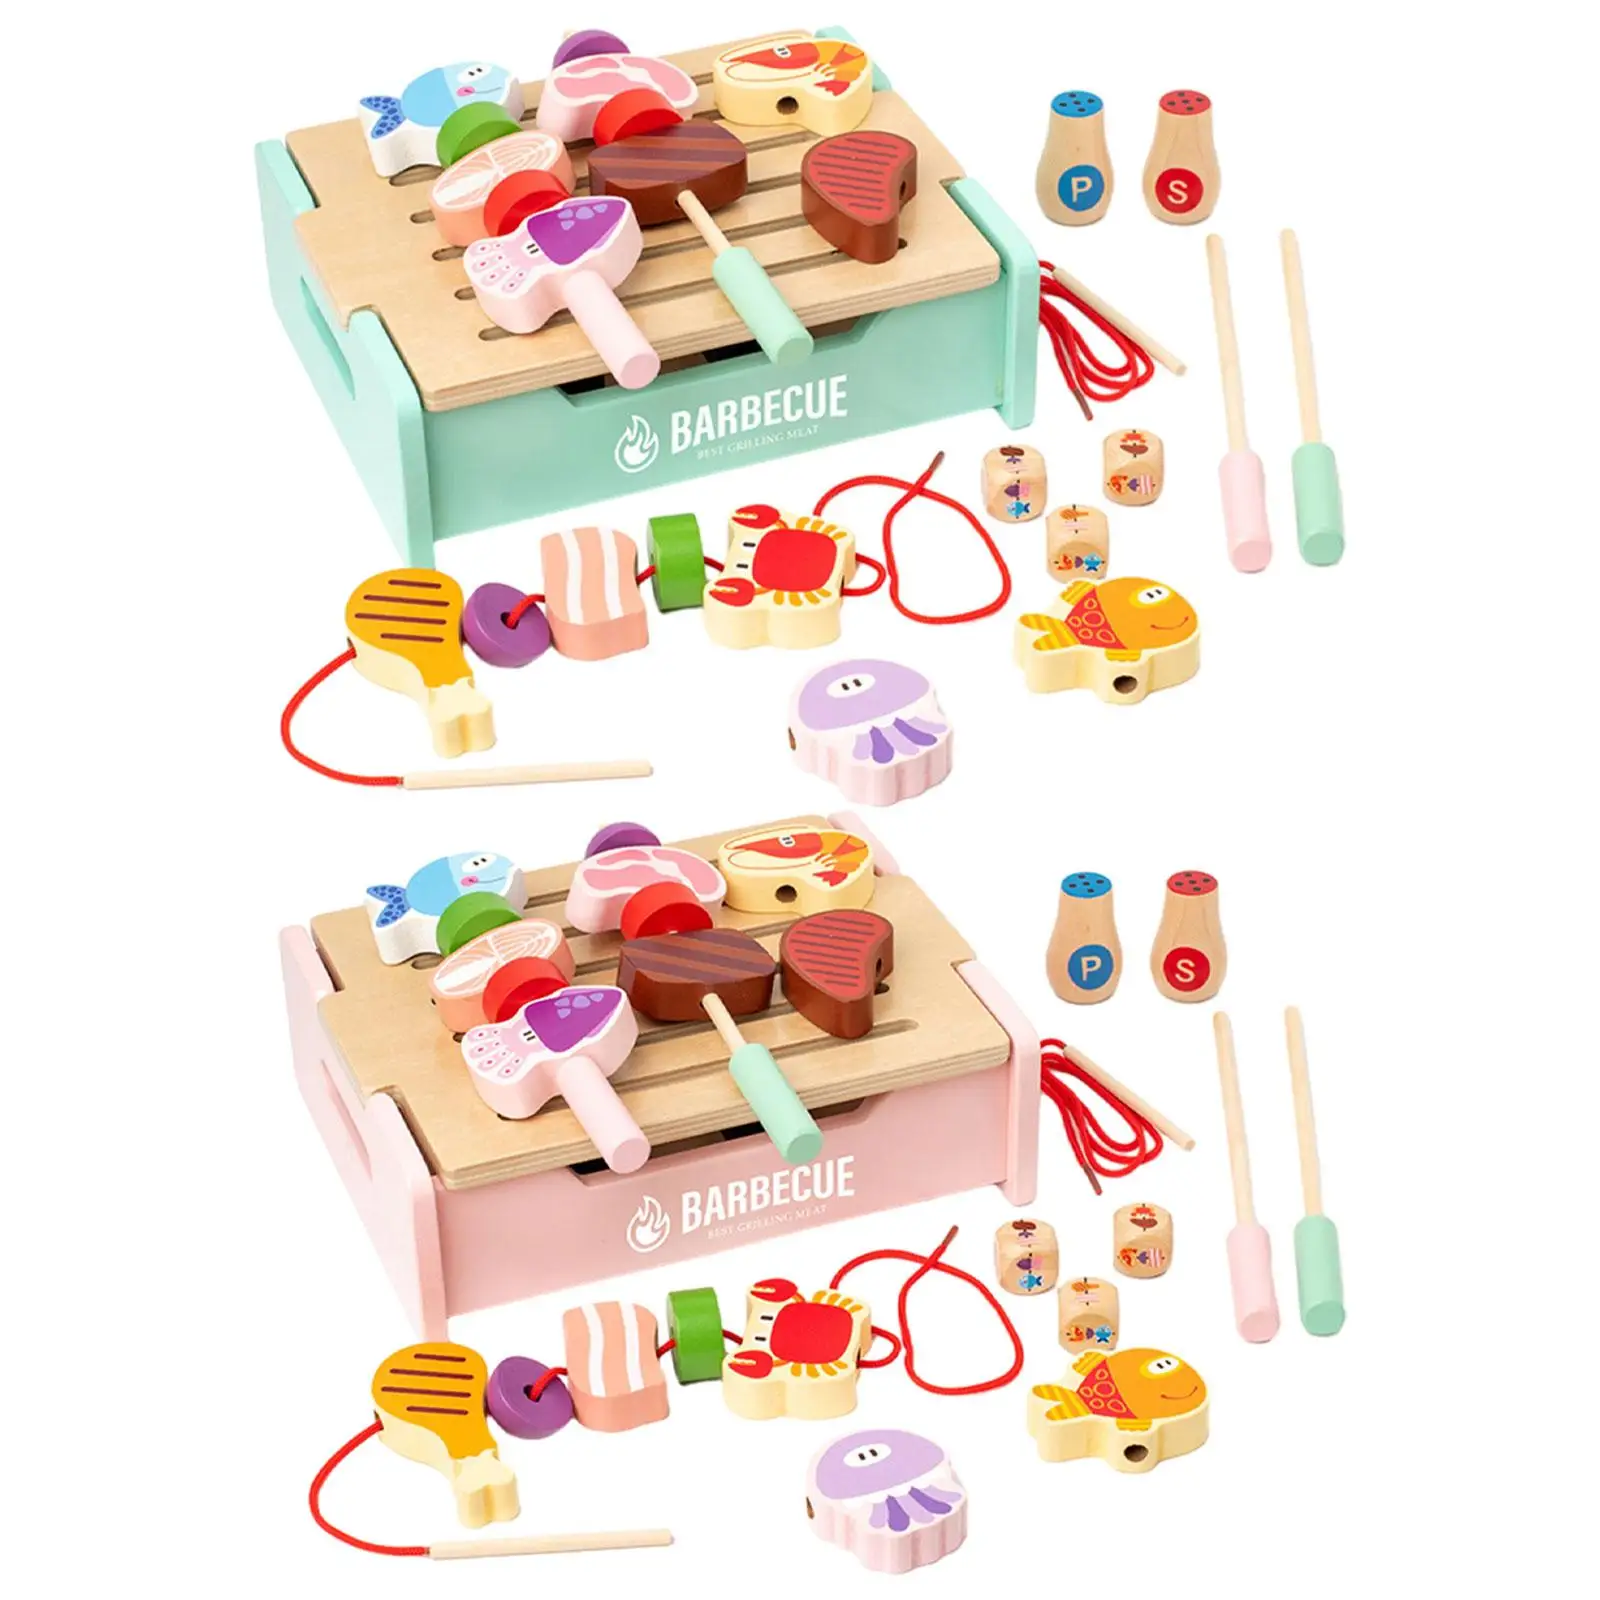 

Kids Bbq Grilling Toy Early Education Pretend Play Playset for Age 3 4 5 6 7 Boys Girls Children Birthday Gifts